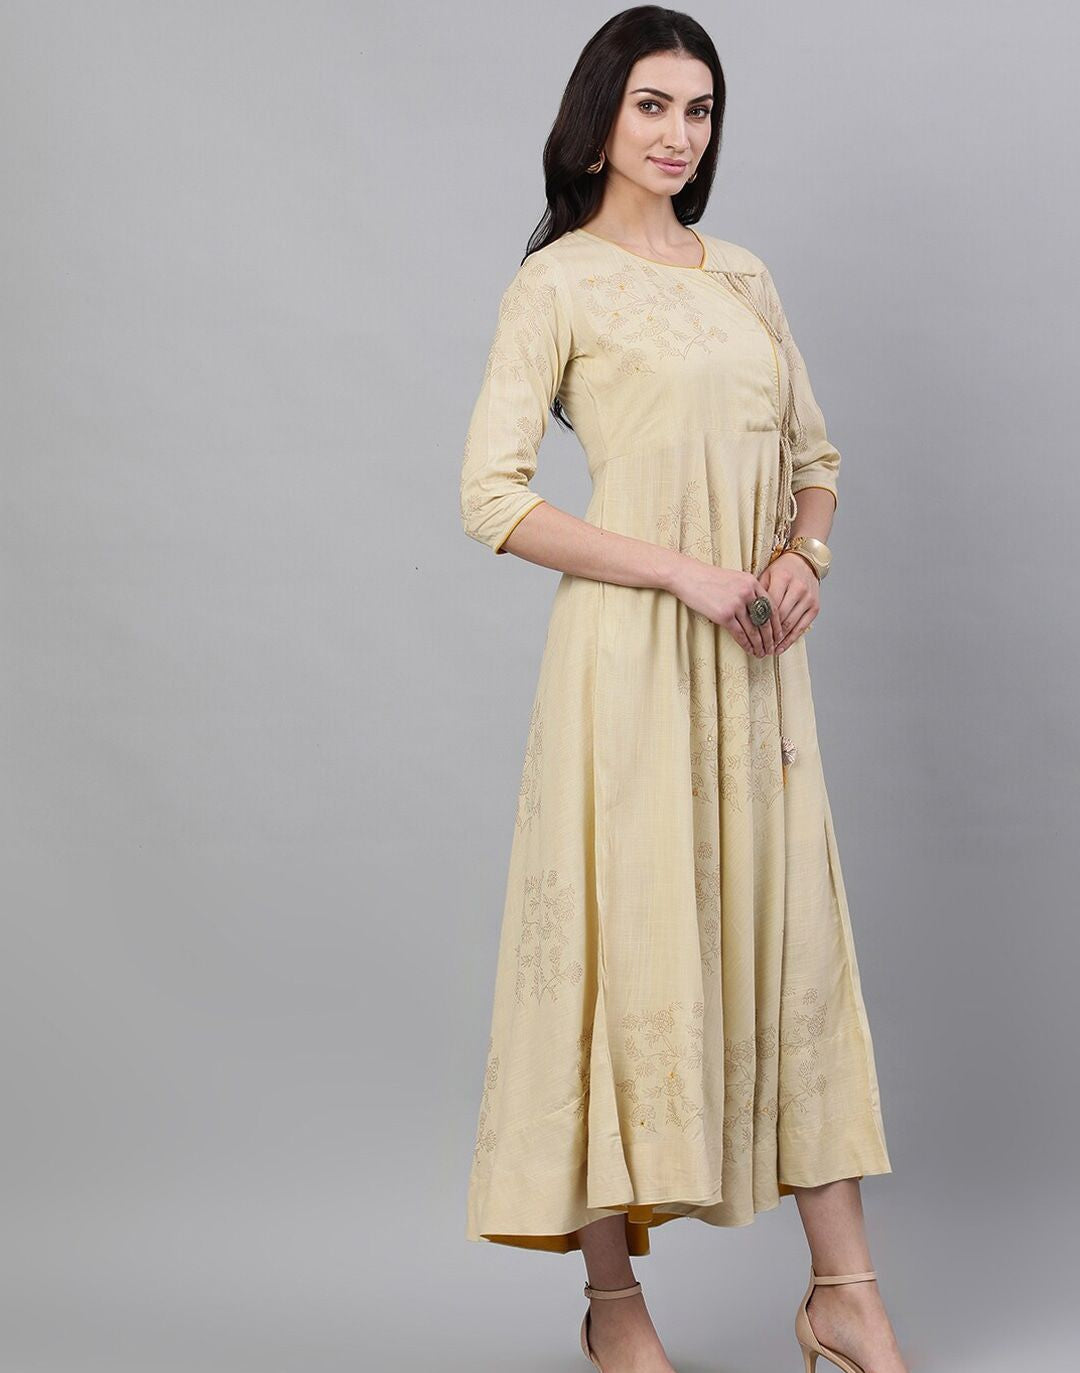 Beige Floral Printed Tie-Up Neck Viscose Rayon Maxi Dress With Dupatta